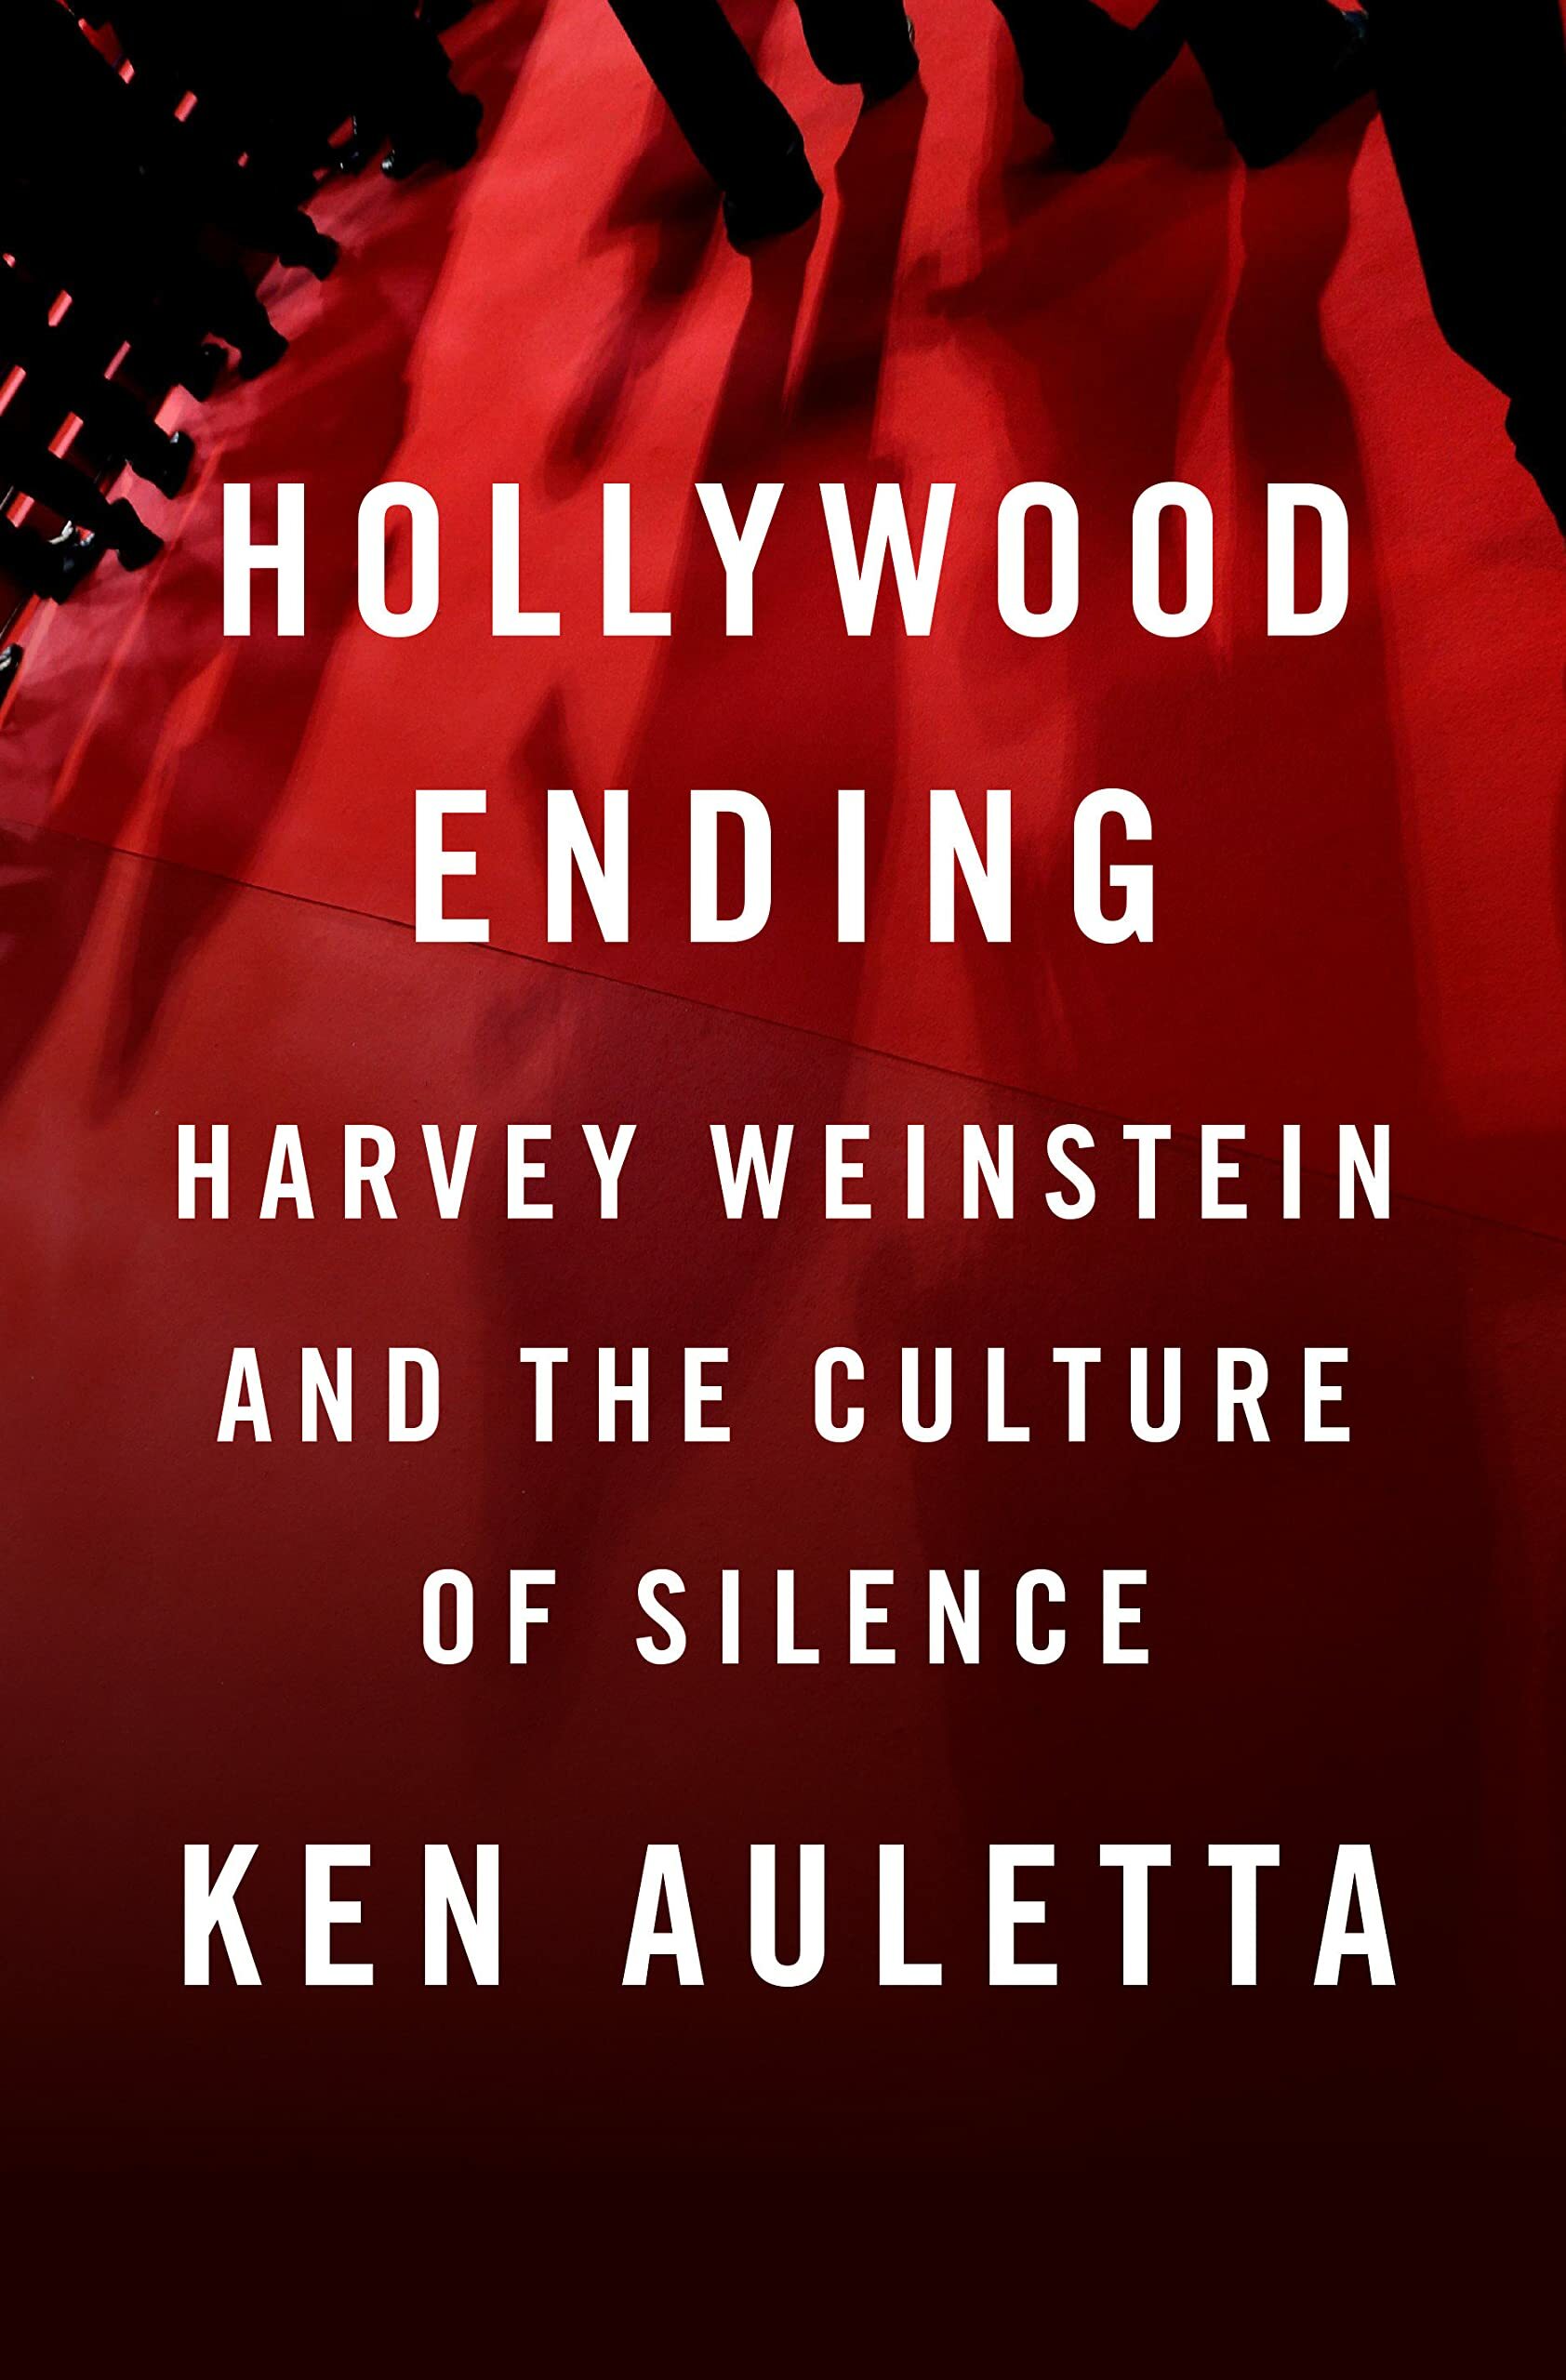 Ken Auletta discusses “Hollywood Ending: Harvey Weinstein and the Culture of Silence” on August 19.